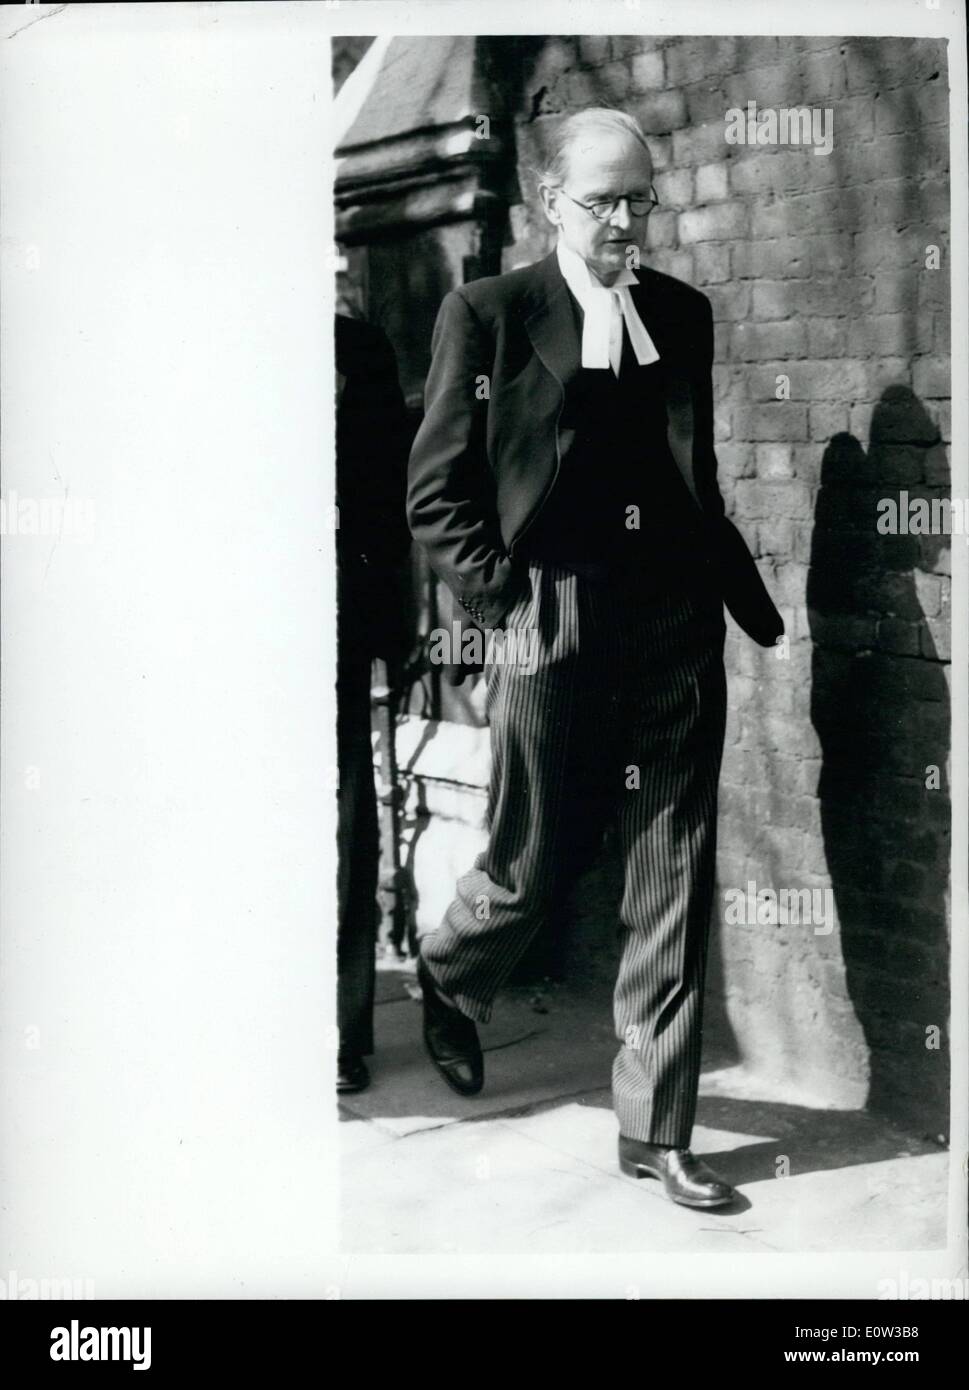 Mar. 03, 1961 - Case Against Vicar continues: The case in which the Rev. William Bry Thomas, Vicar of the Church of the Ascens, Balham Hill, faces immorality charges - continued today at Limberth Palace. Photo Shows Today's picture Mr. Roger Ormond, Q, who is present in the Bishop of Southwark's case. Stock Photo